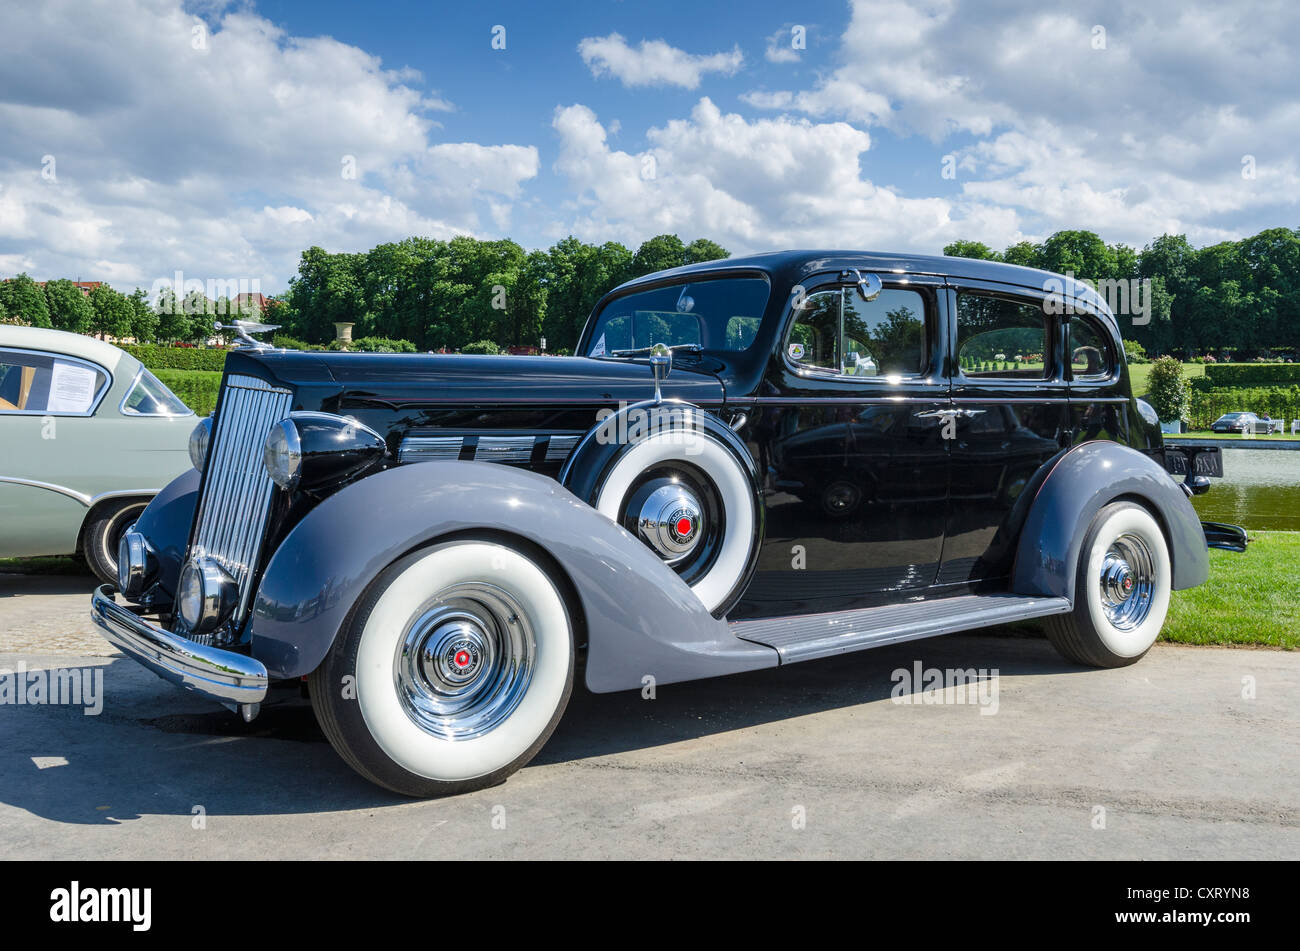 Vintage U.S.-American Packard Eight, built from 1938, festival of classic cars 'Retro Classics meets Barock' Stock Photo